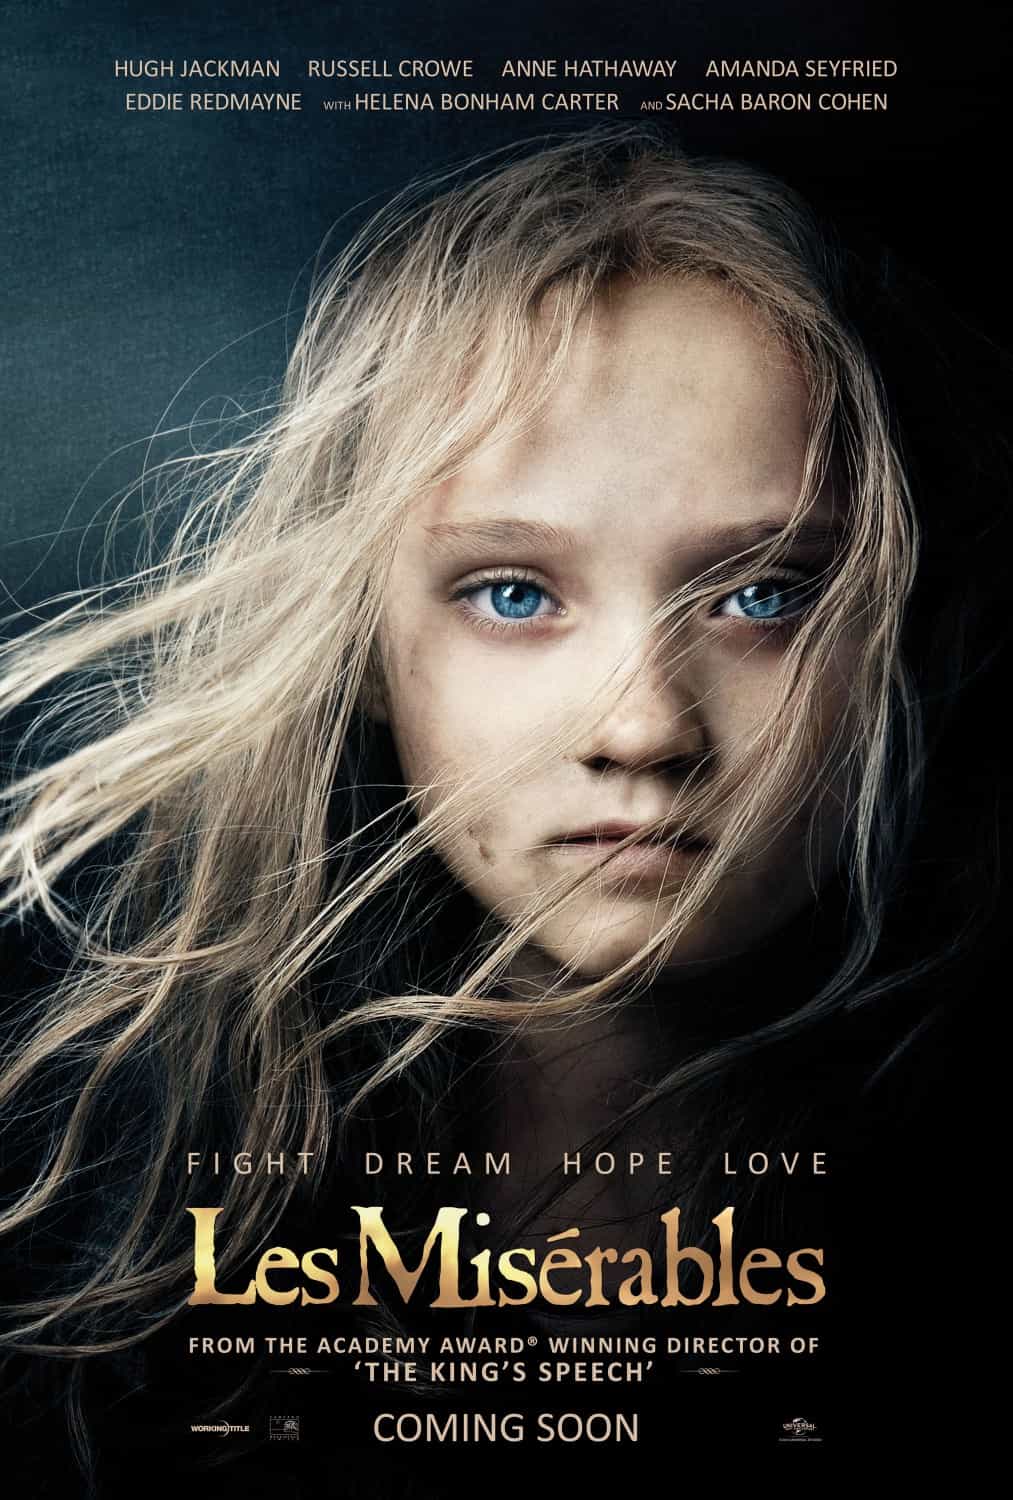 UK Box Office Report: A fourth week at the top for Les Miserables, first film since Avatar to do so